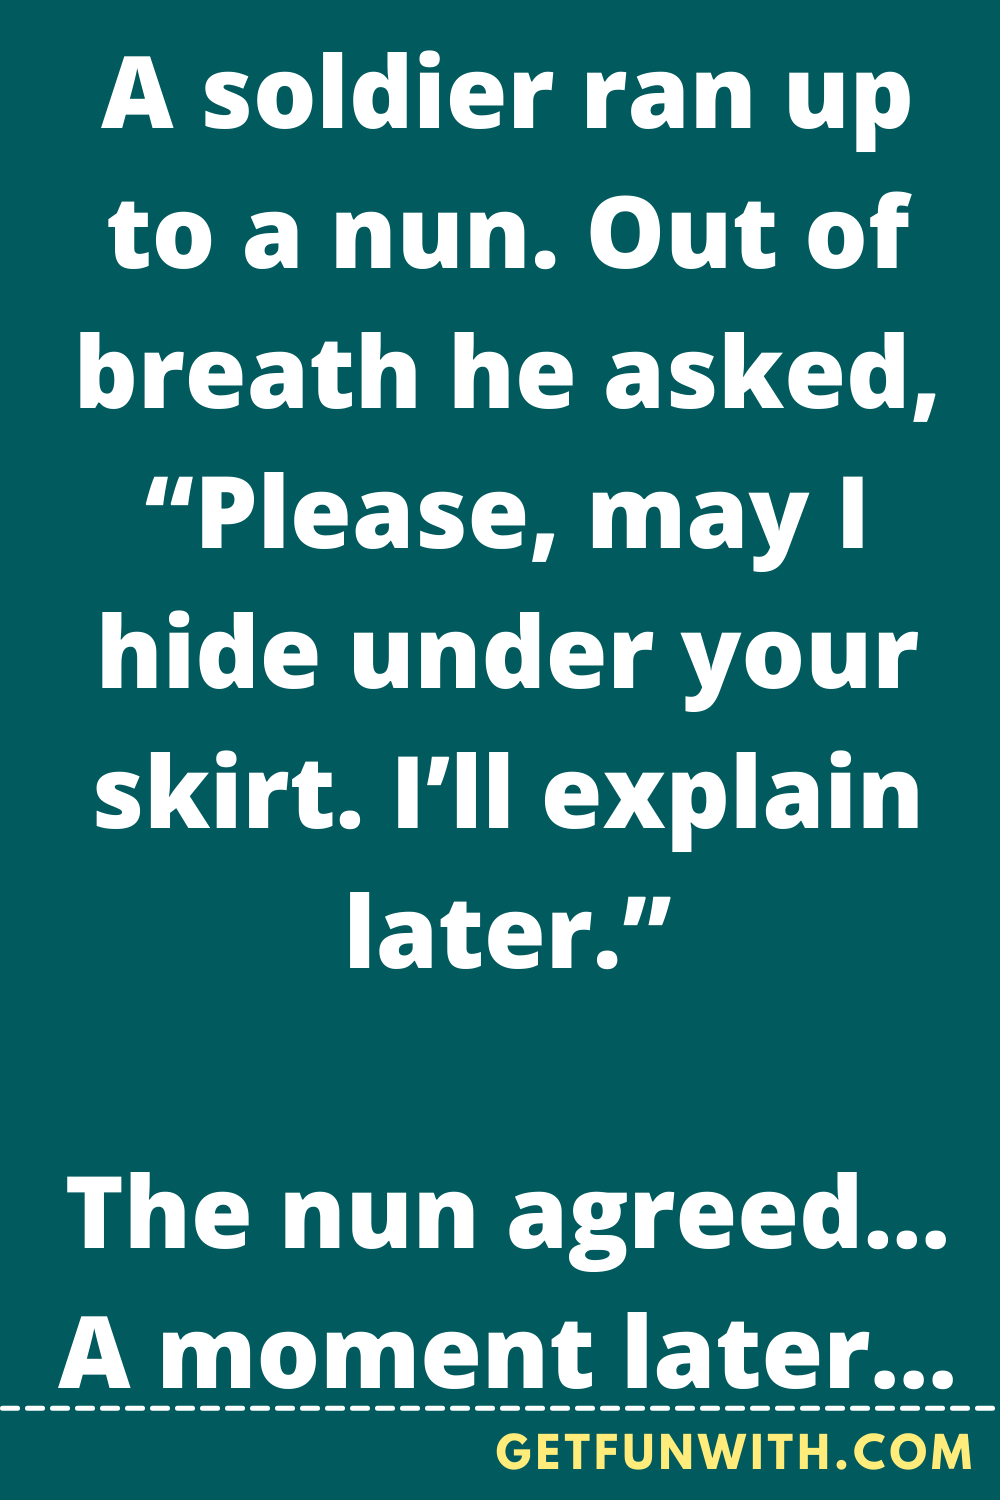 A soldier ran up to a nun. Out of breath he asked, “Please, may I hide under your skirt. I’ll explain later.”